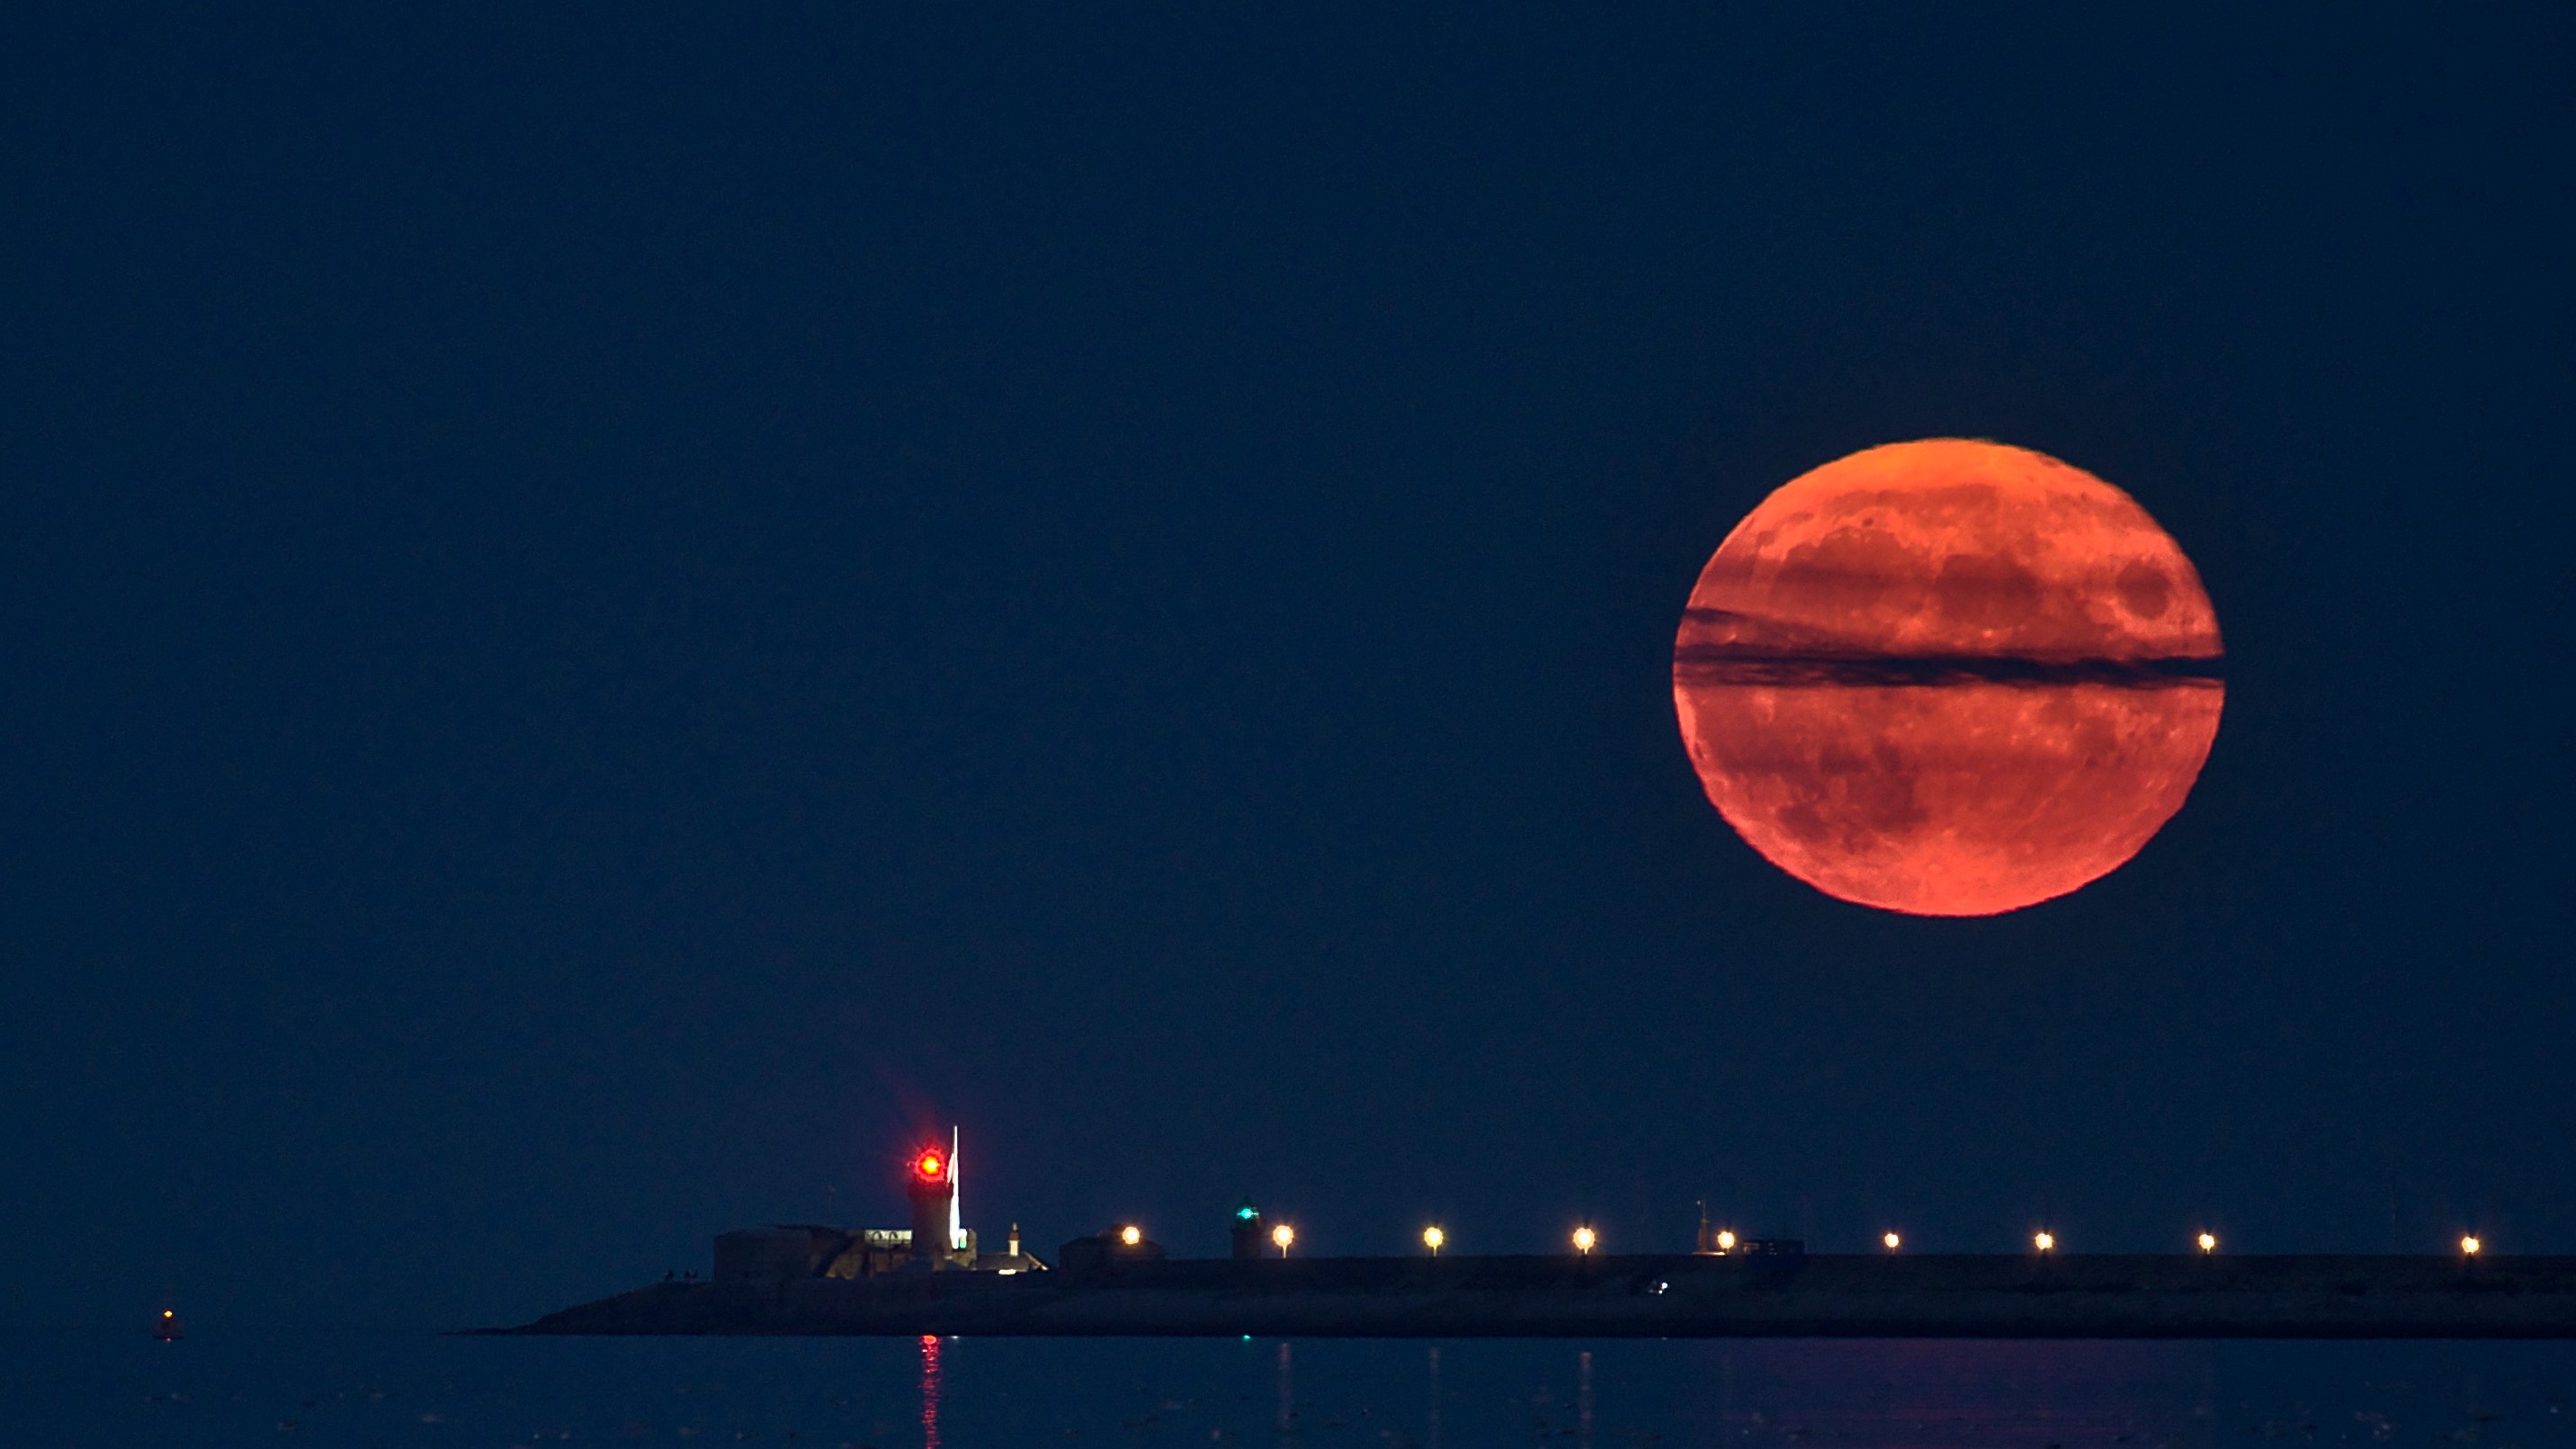 August supermoons rises Tuesday, Aug. 1 with Sturgeon full moon | Space